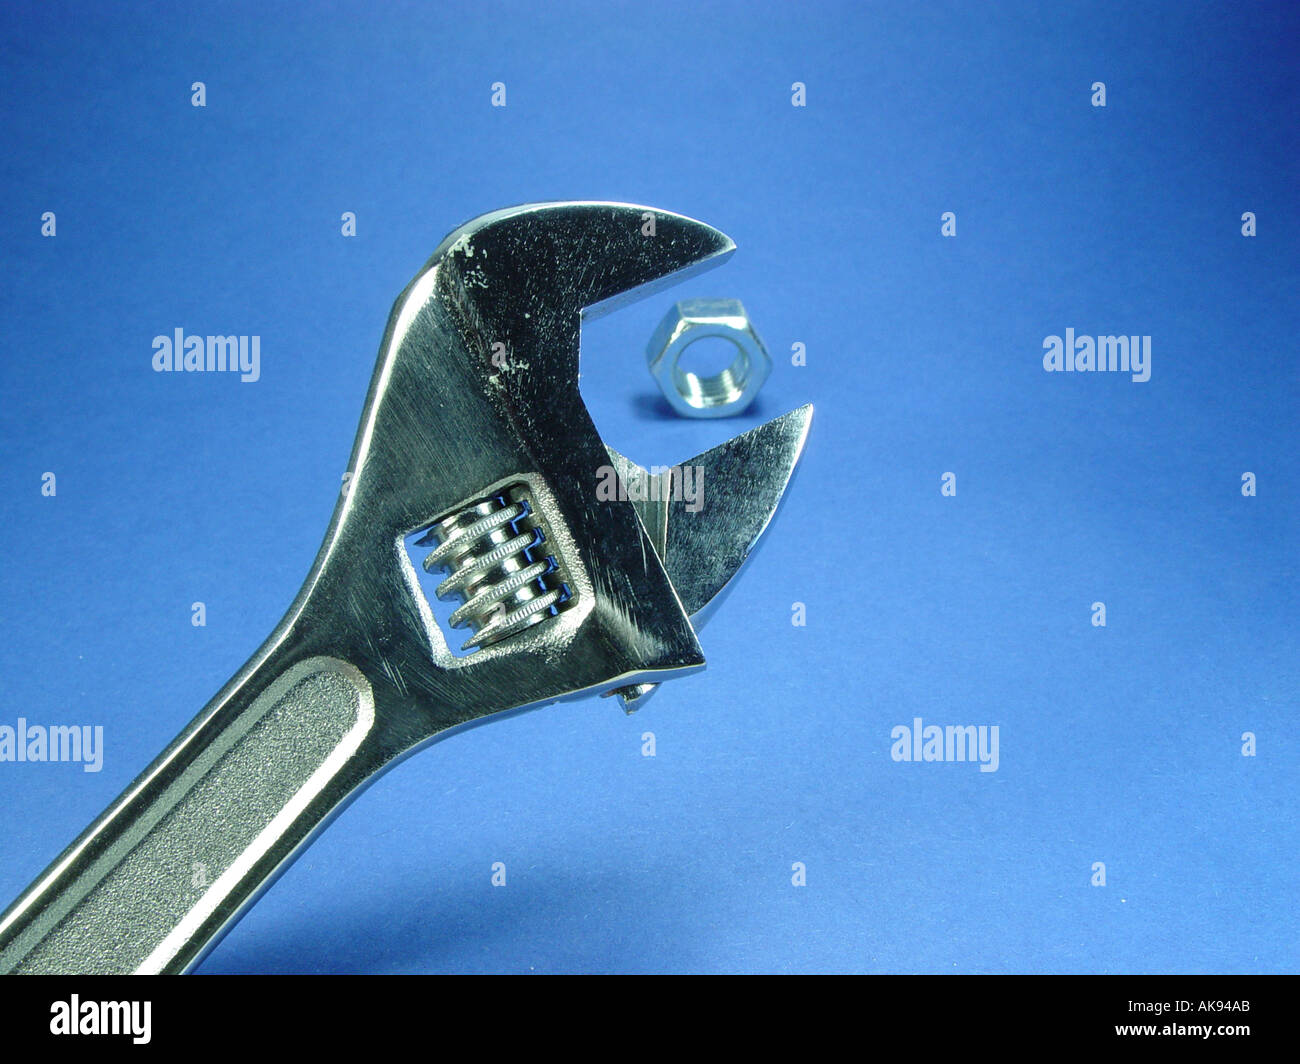 Tool as symbol for work Stock Photo